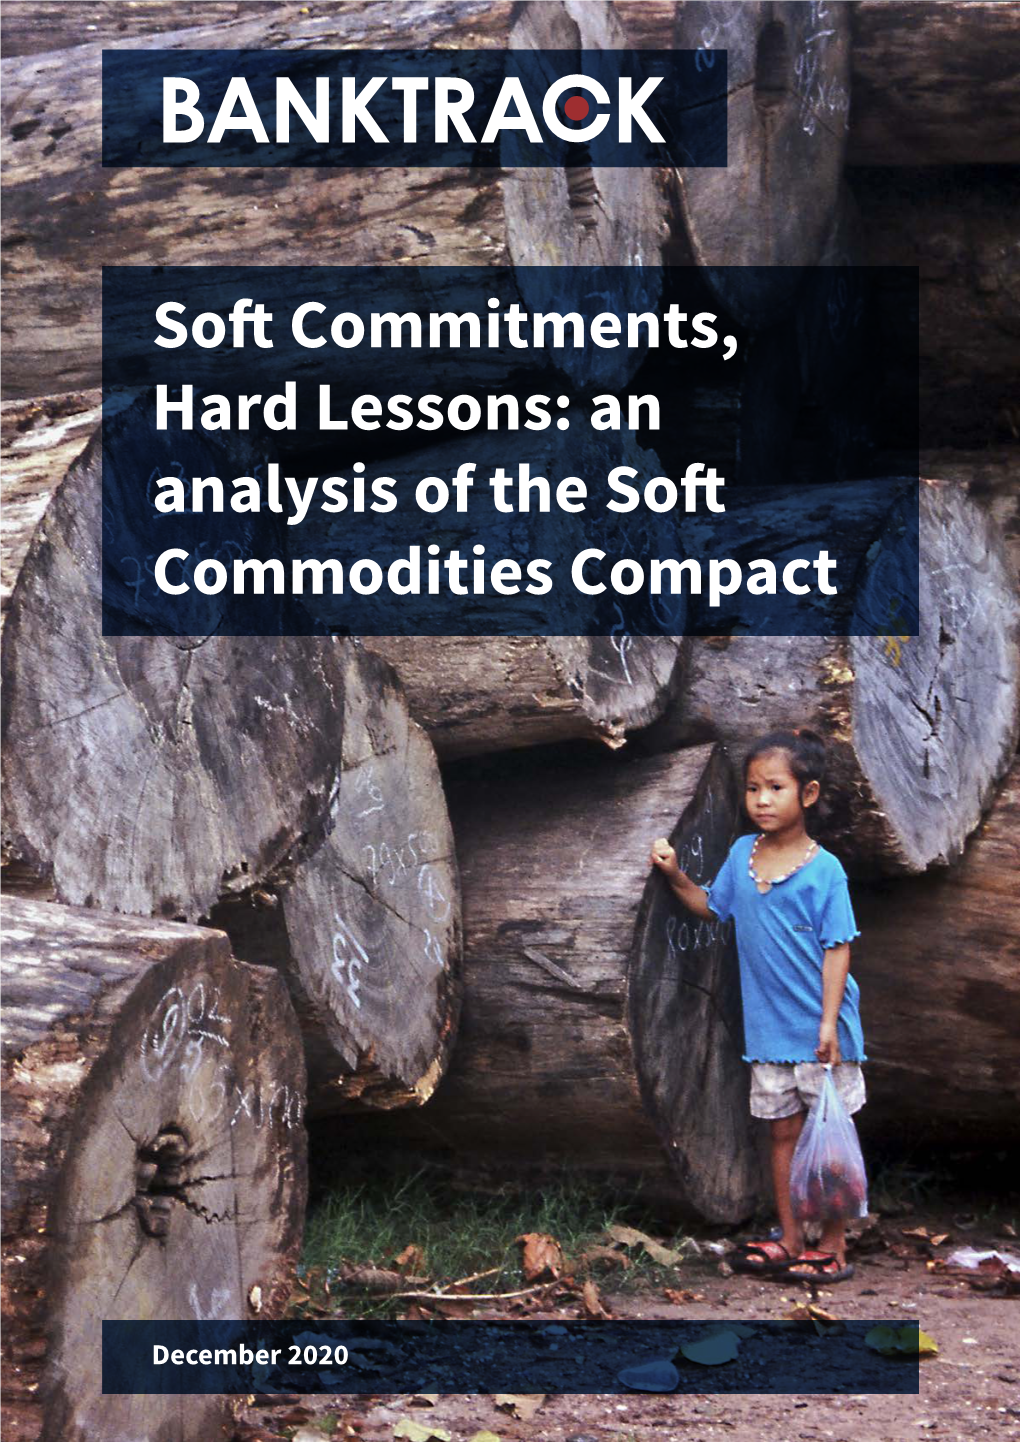 Soft Commitments, Hard Lessons: an Analysis of the Soft Commodities Compact